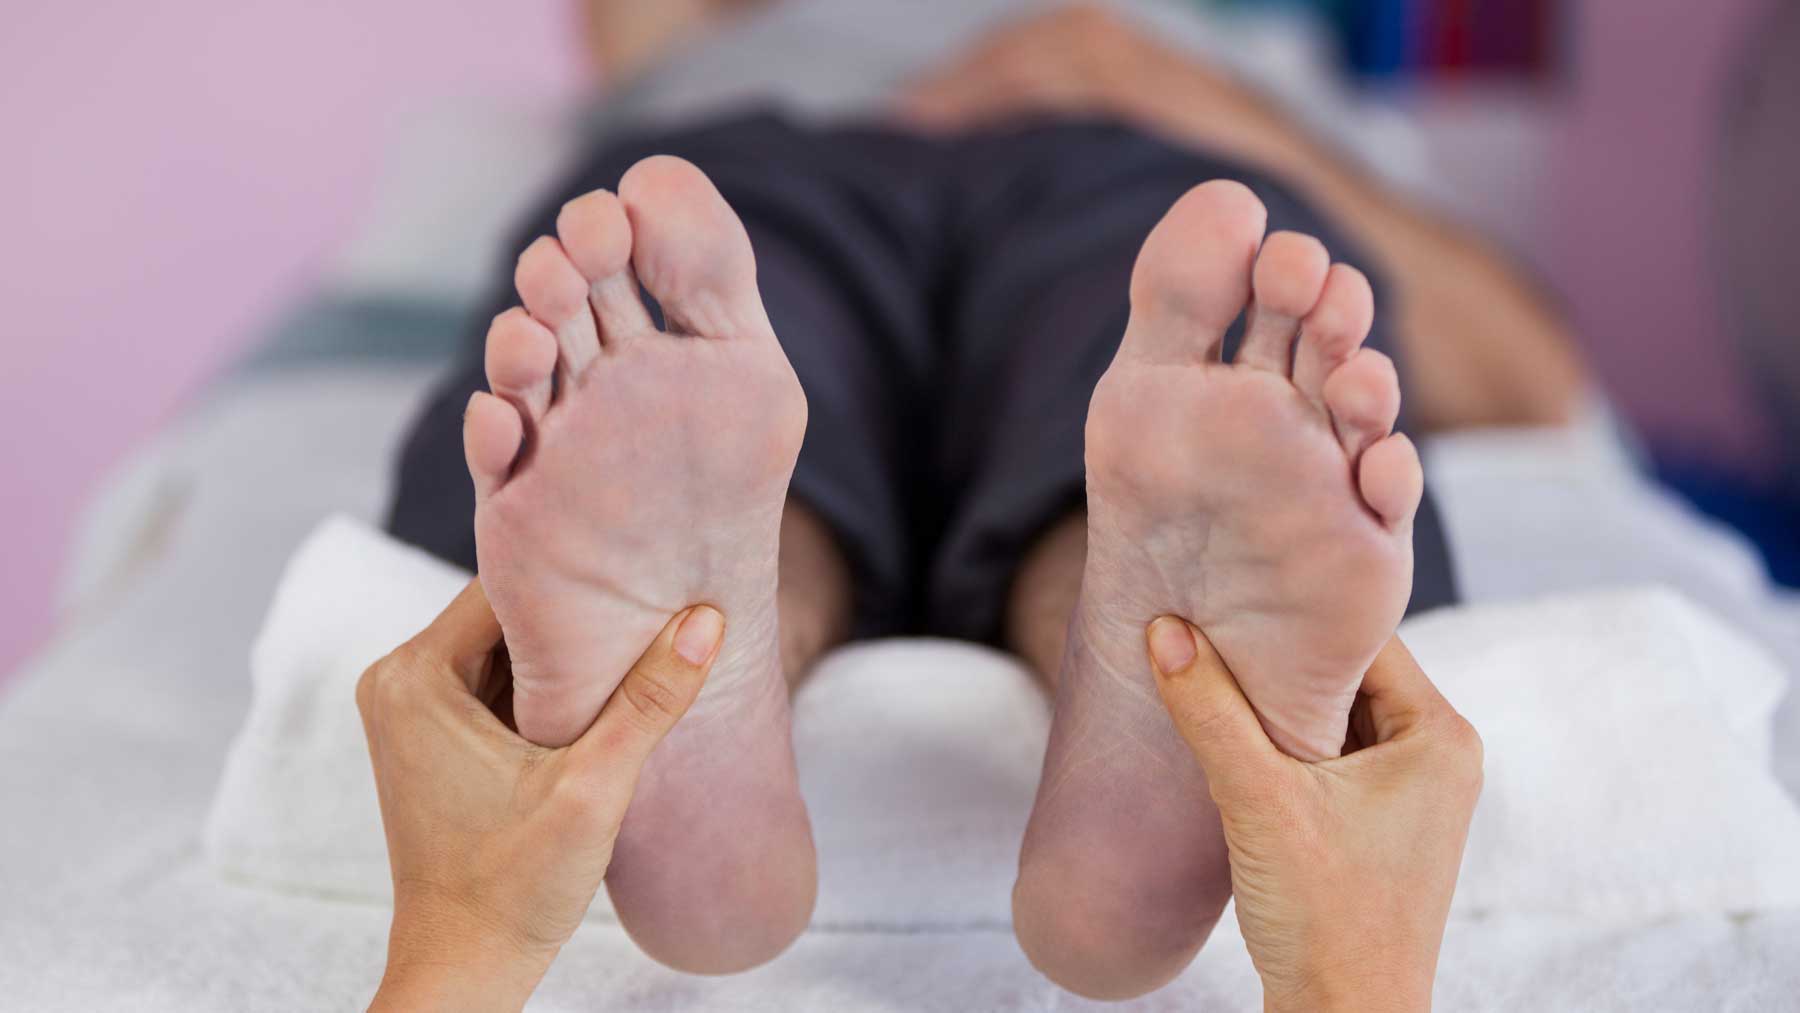 The Connection Between Diabetes and Podiatry